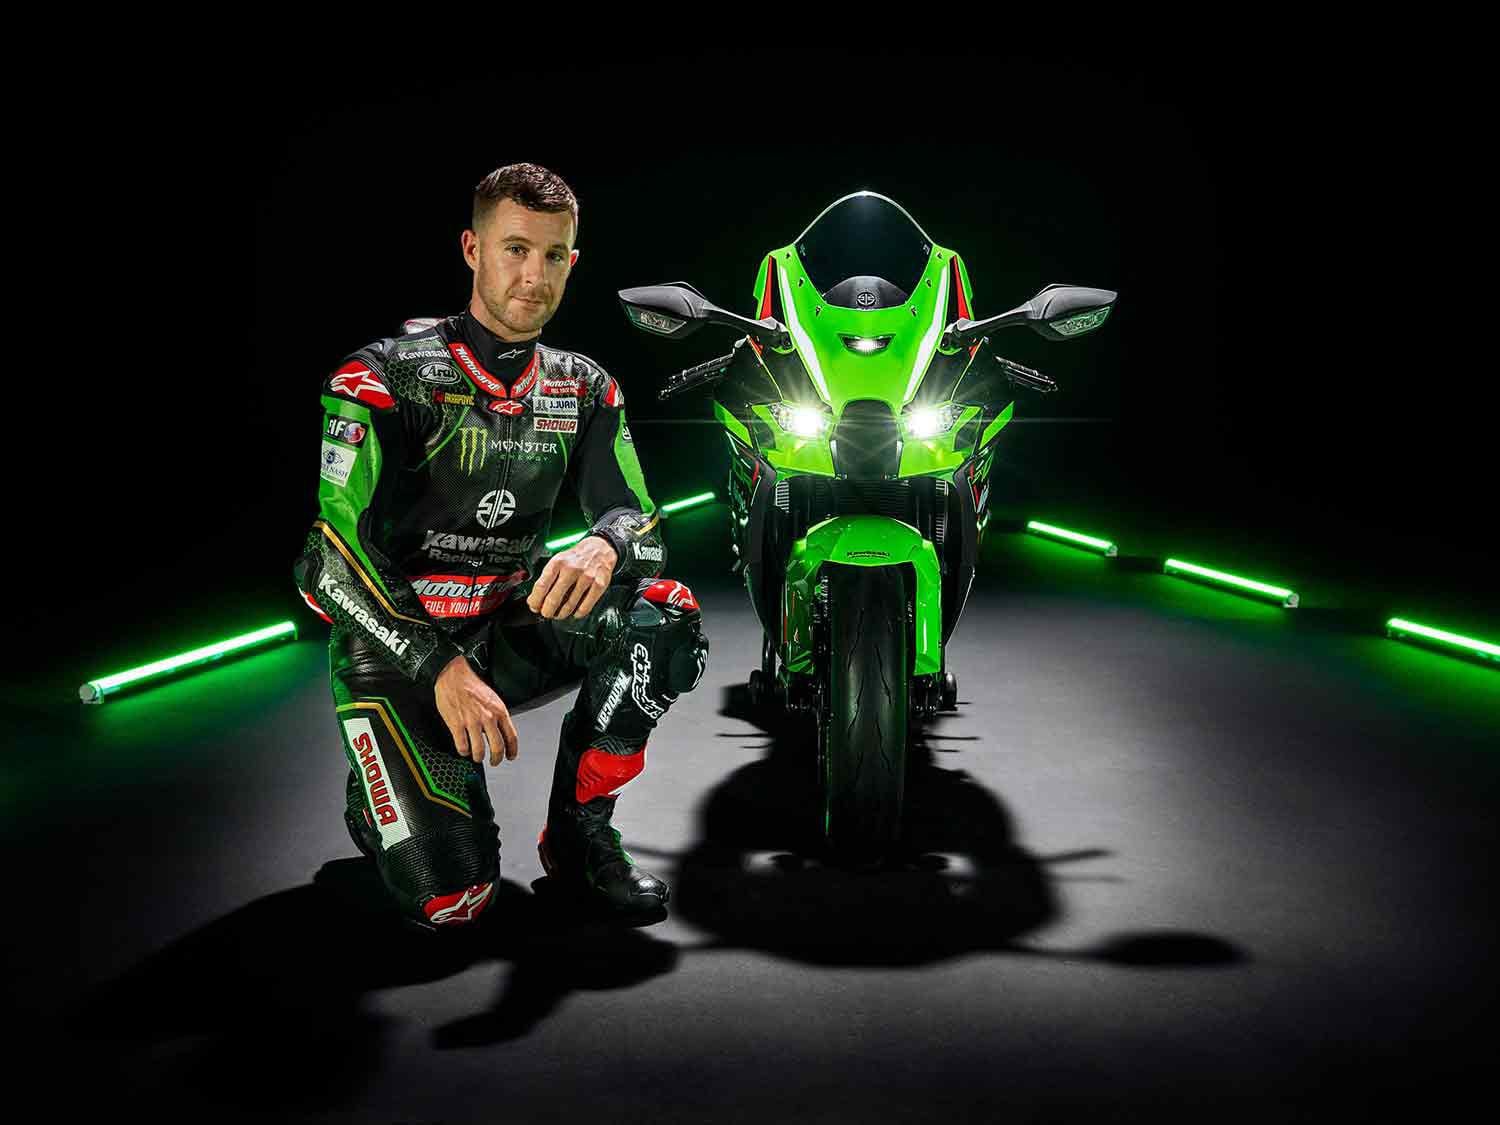 The man himself. We will never cease wondering what damage Jonathan Rea could do in MotoGP.